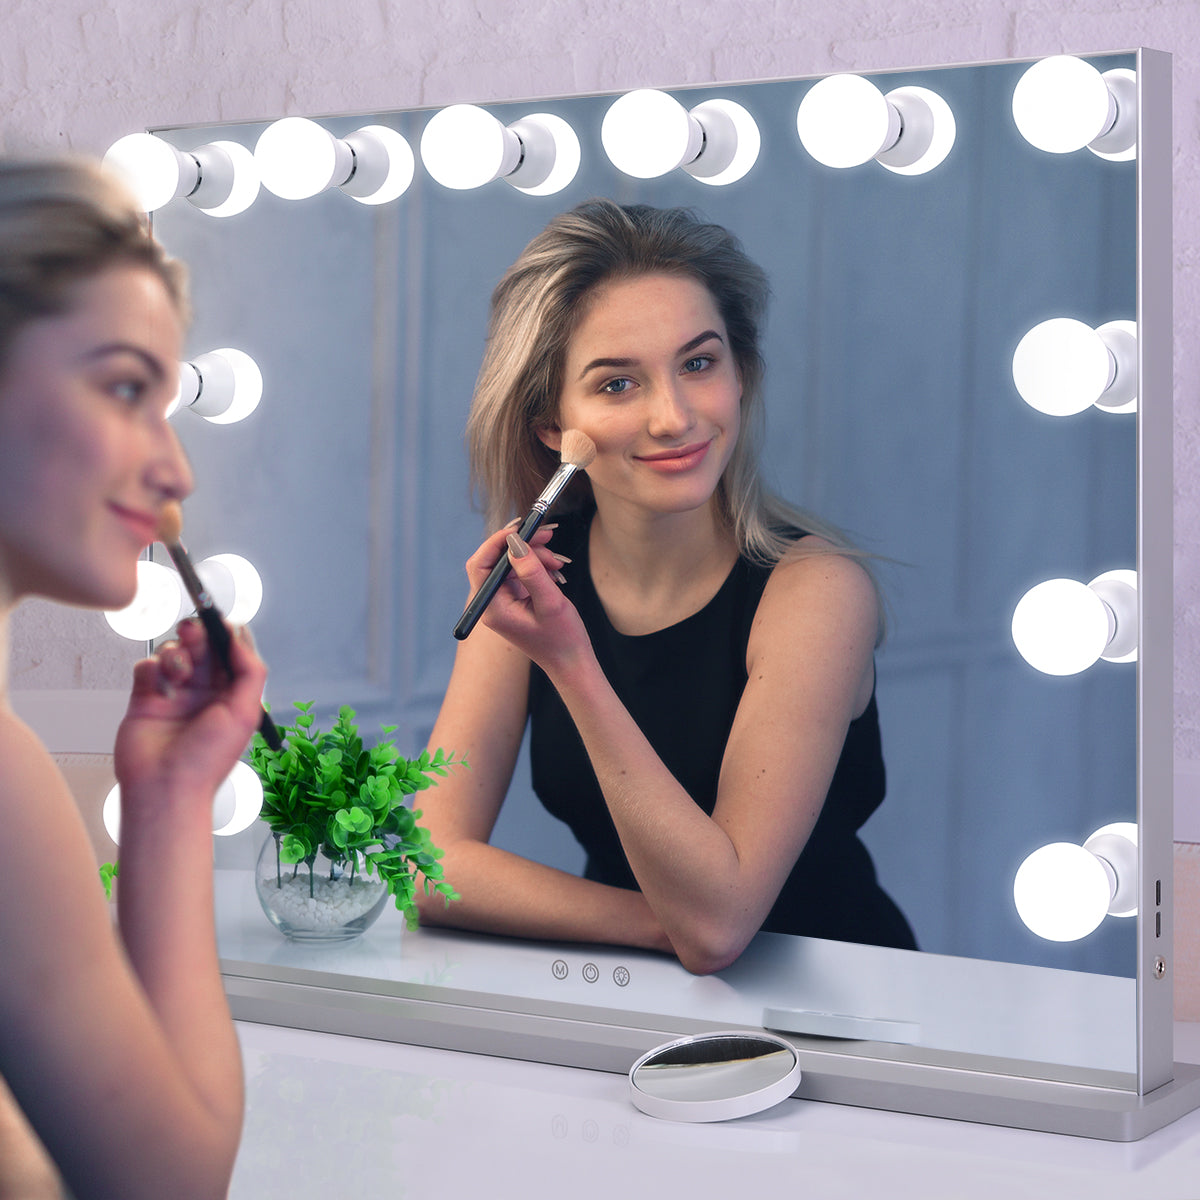 This affordable lighted vanity mirror from BEAUTME is perfect for applying makeup